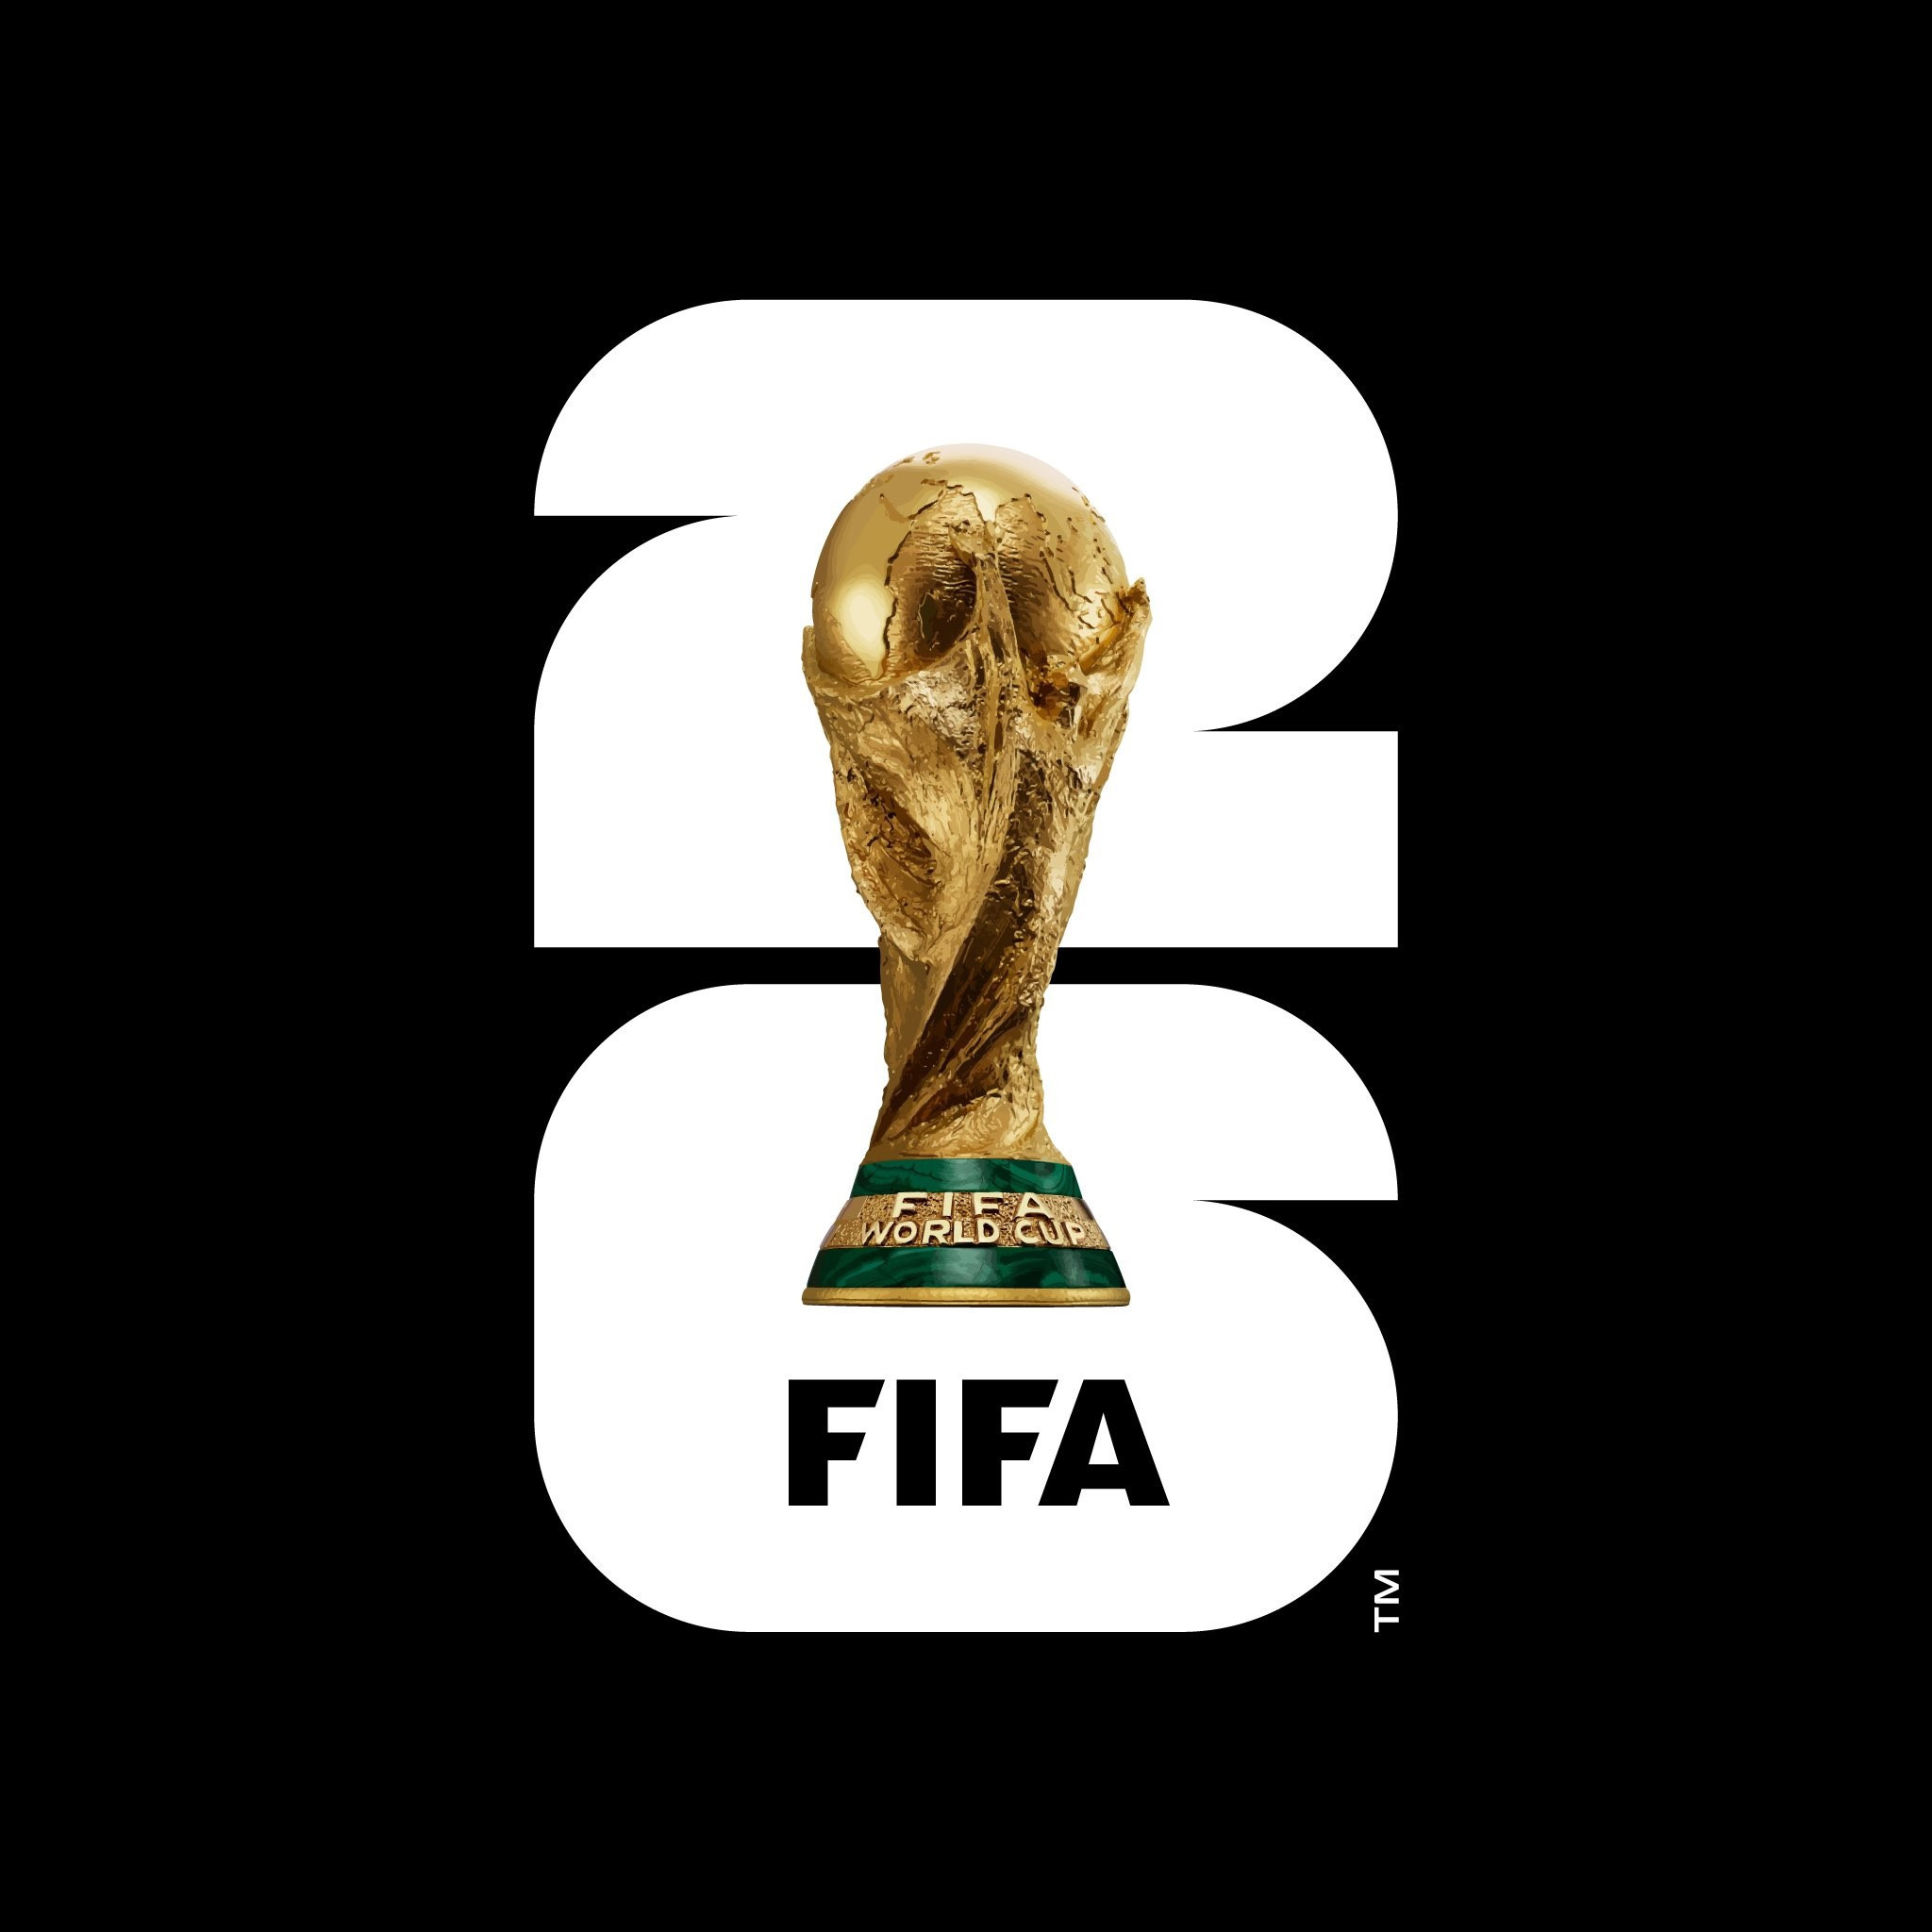 The actual FIFA World Cup trophy is being used in an official logo for the tournament for the first time ©FIFA